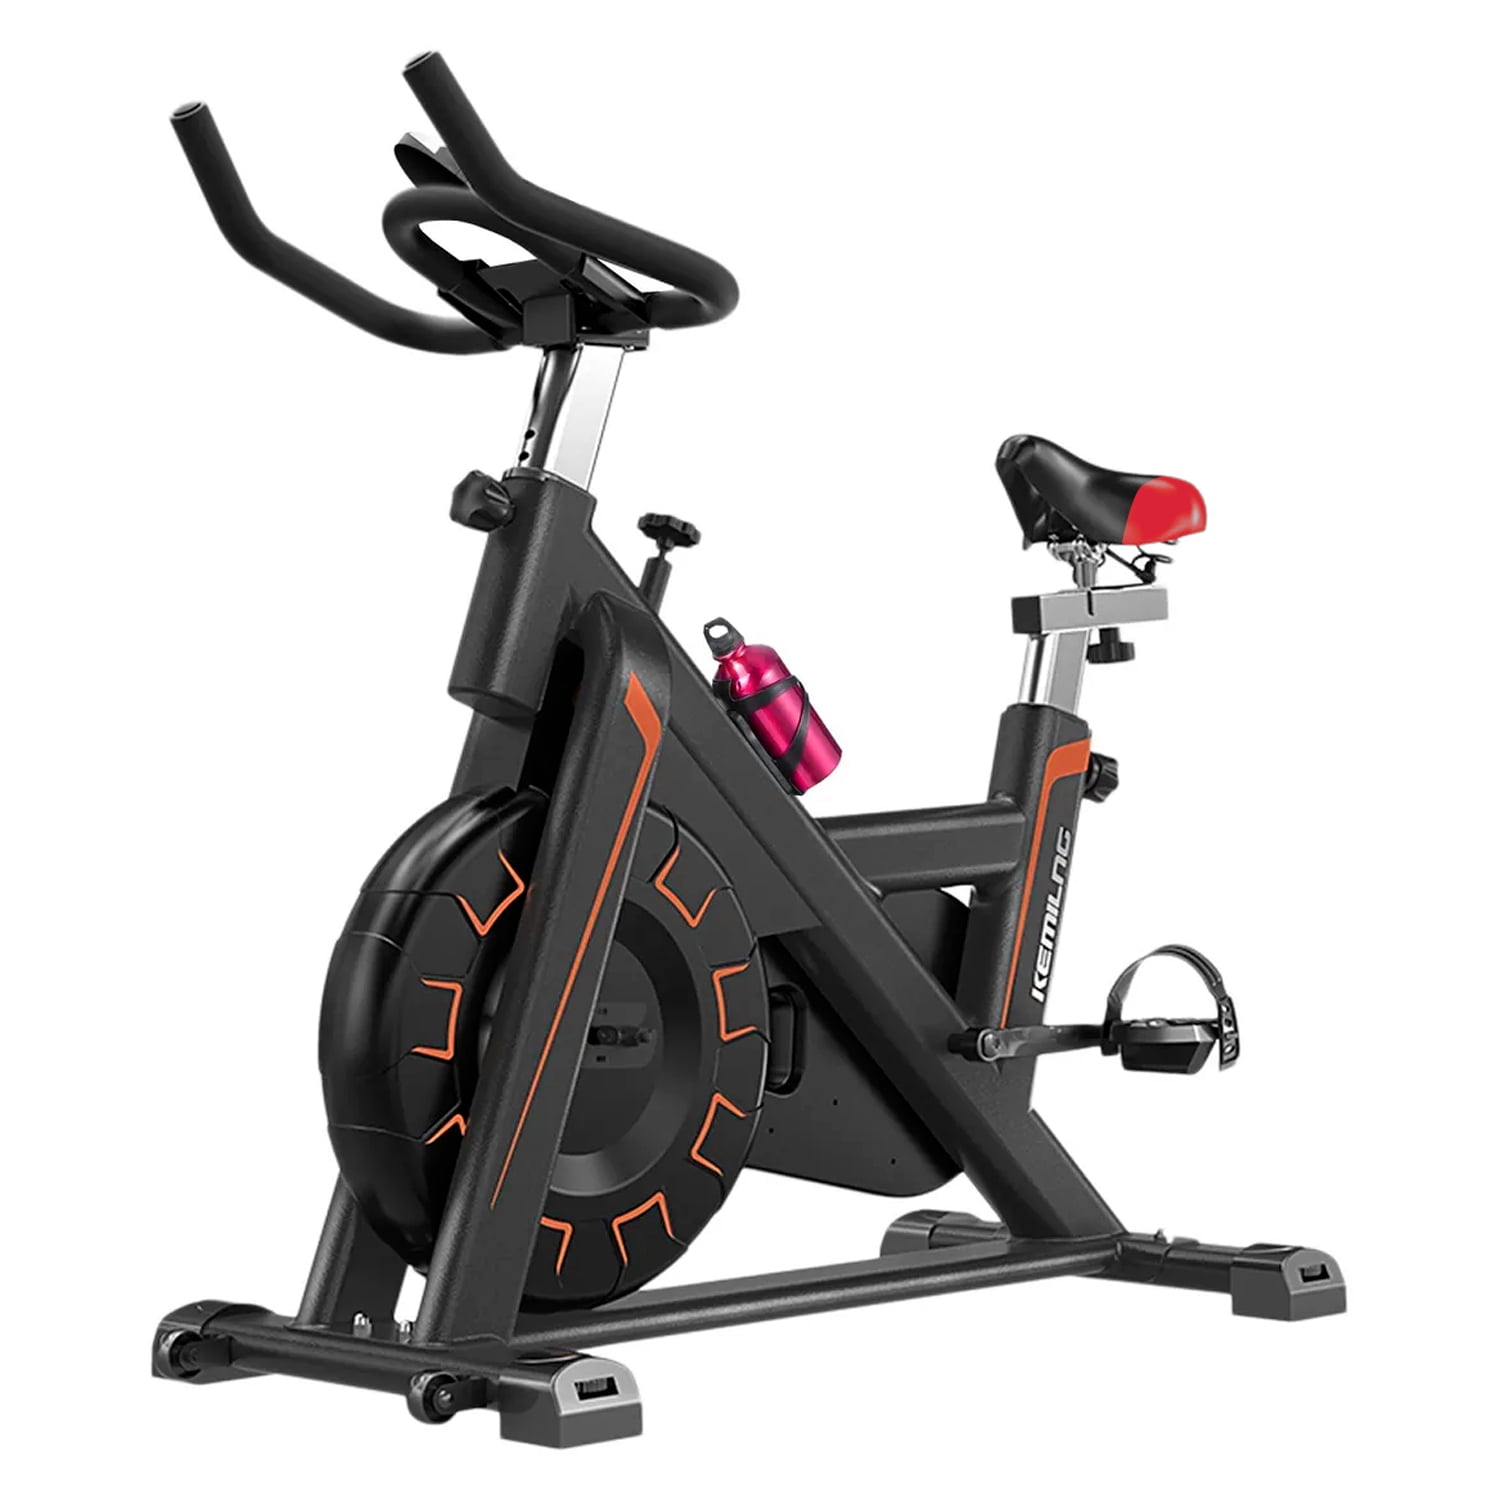 Bicicleta Spinning Dynamic Indoor Fitness Volante Inercia 6Kg